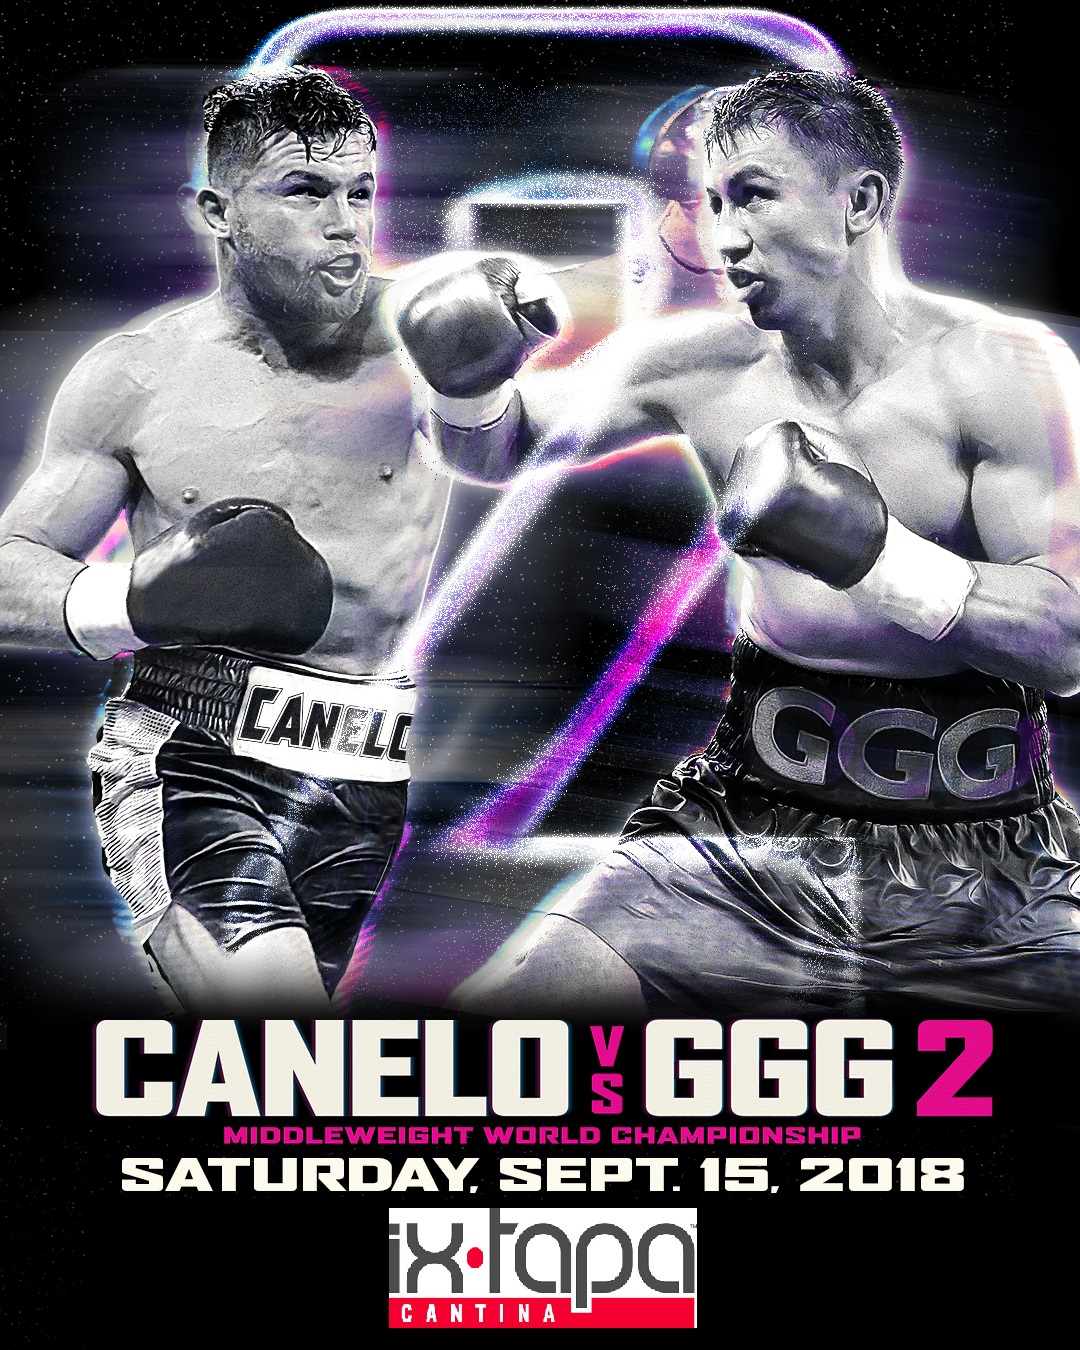 CANELO vs TRIPLE G 2 FIGHT NIGHT VIEWING PARTY Tickets 09/15/18